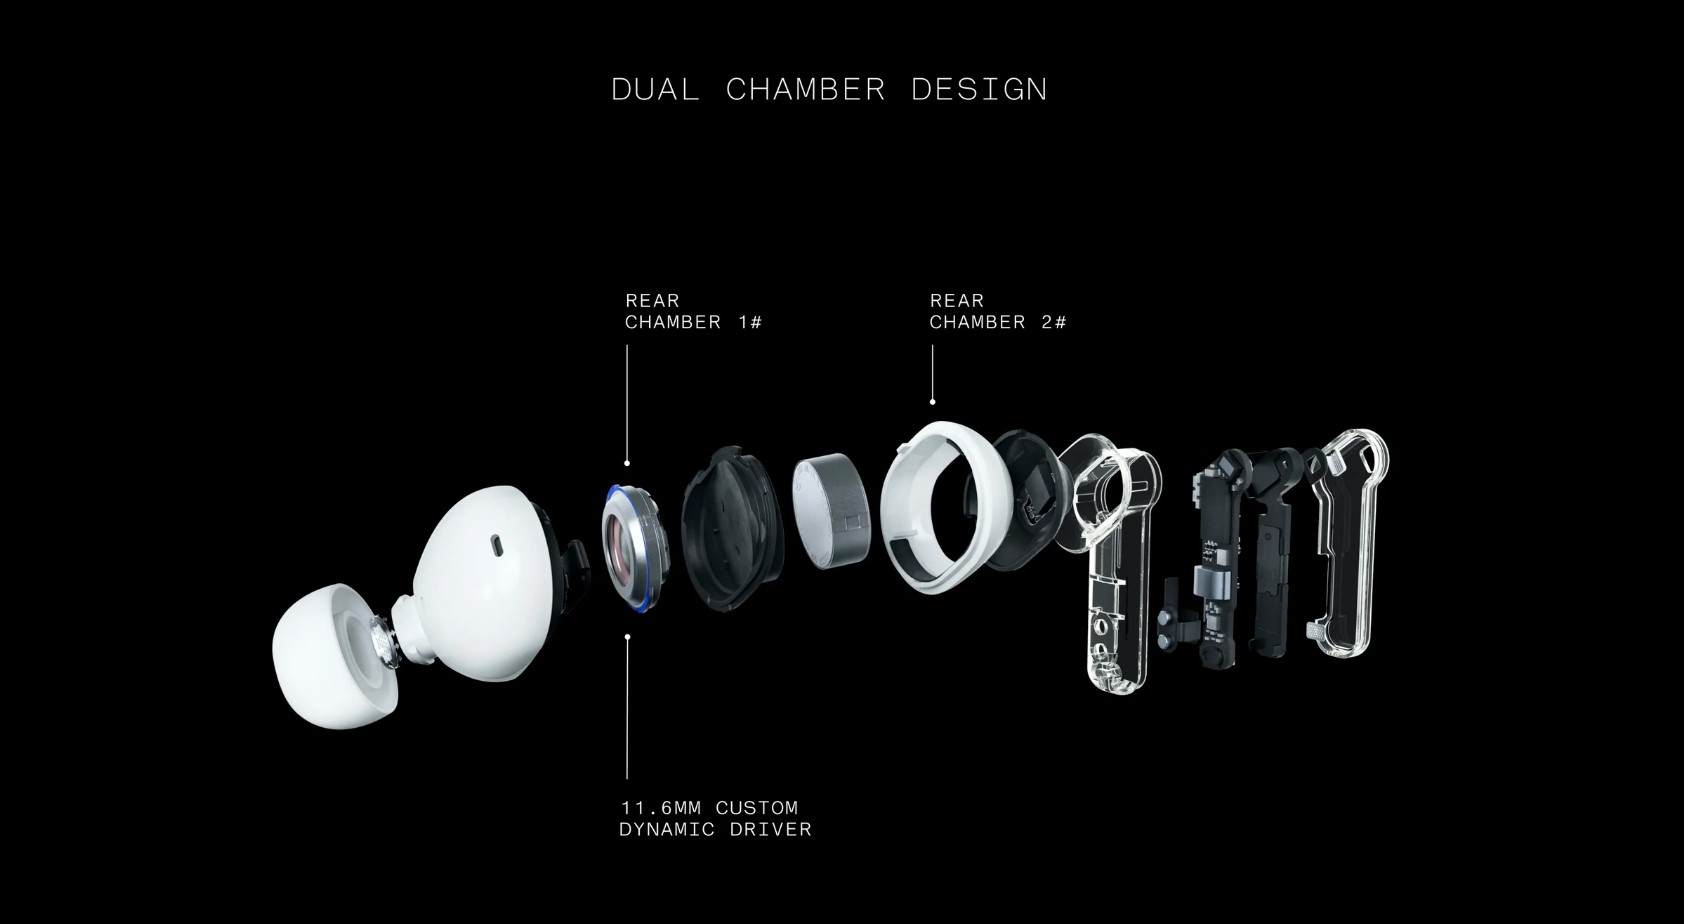 Nothing Ear 2 Dual Chamber Design